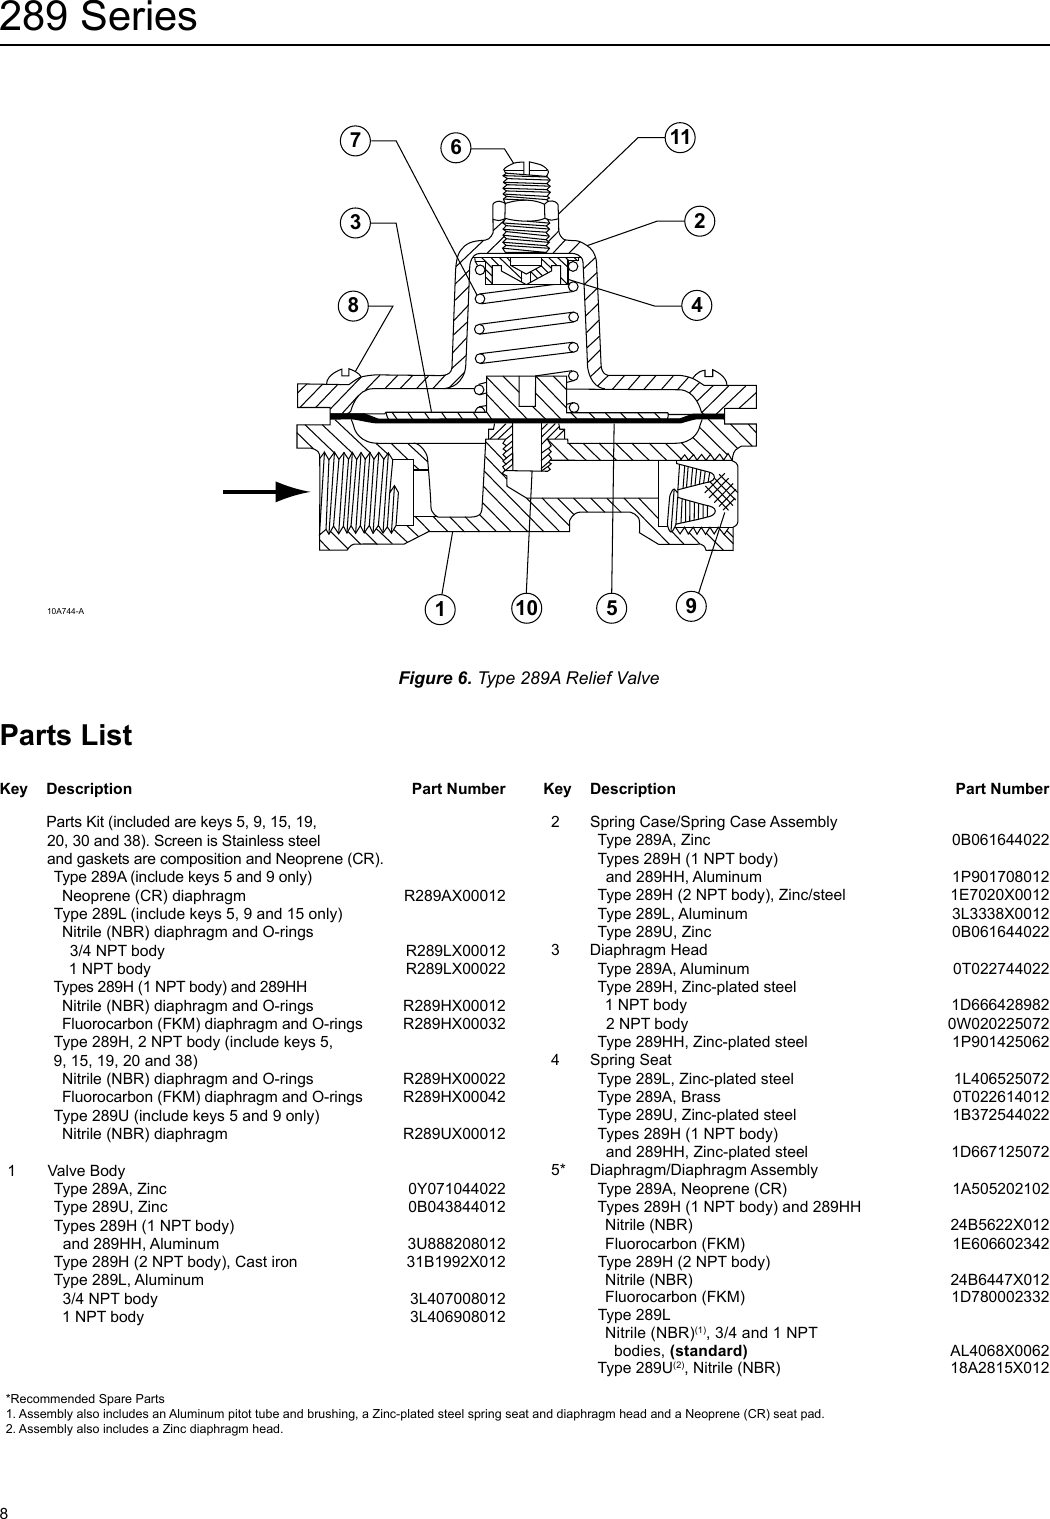 Page 8 of 12 - Emerson Emerson-289-Series-Relief-Valves-Backpressure-Regulators-Instruction-Manual-  Emerson-289-series-relief-valves-backpressure-regulators-instruction-manual